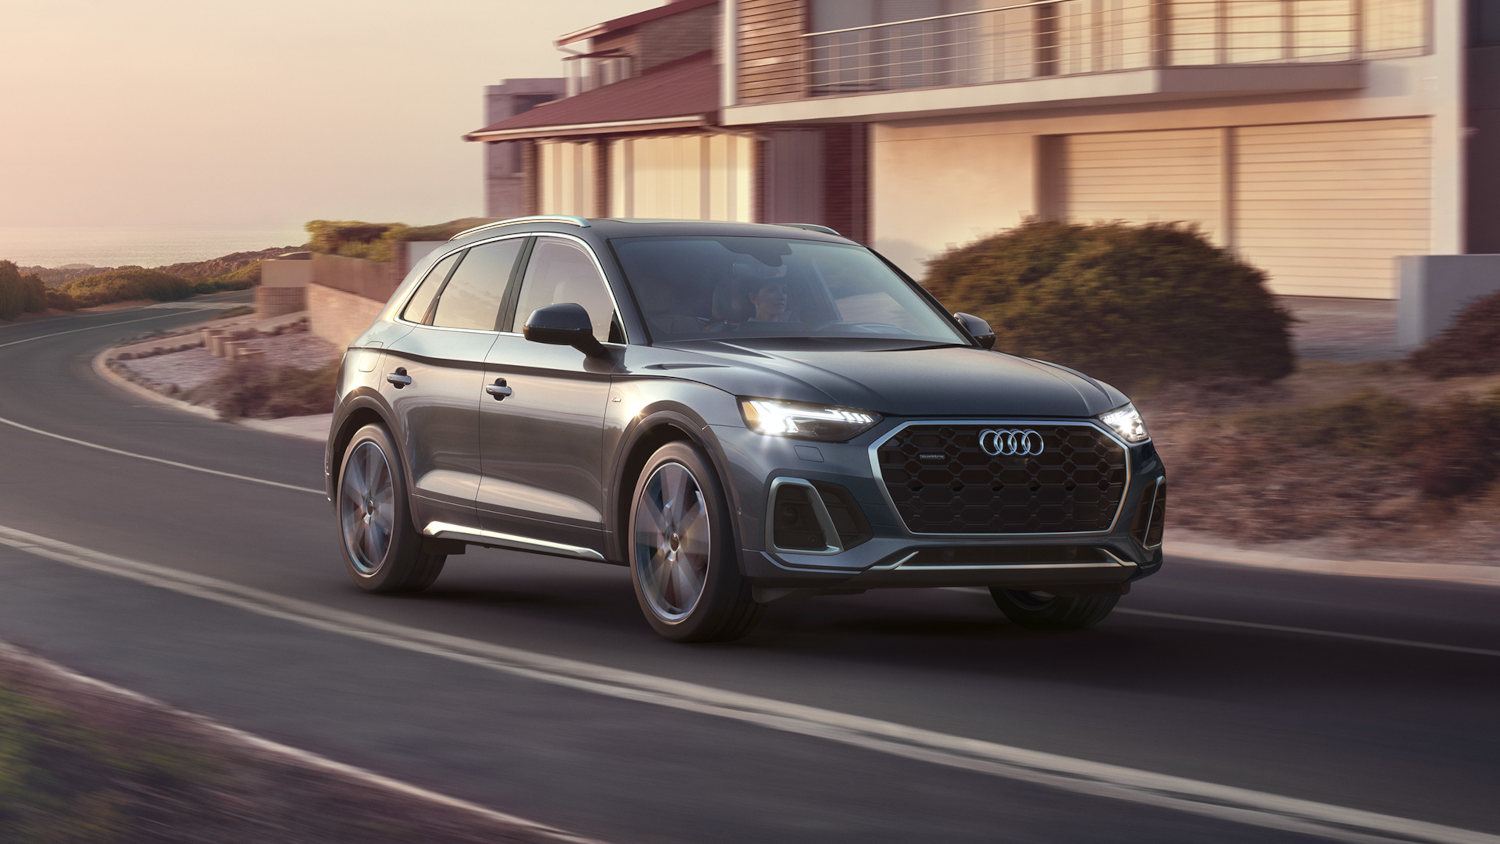 The 2023 Audi Q5 is a luxury compact SUV